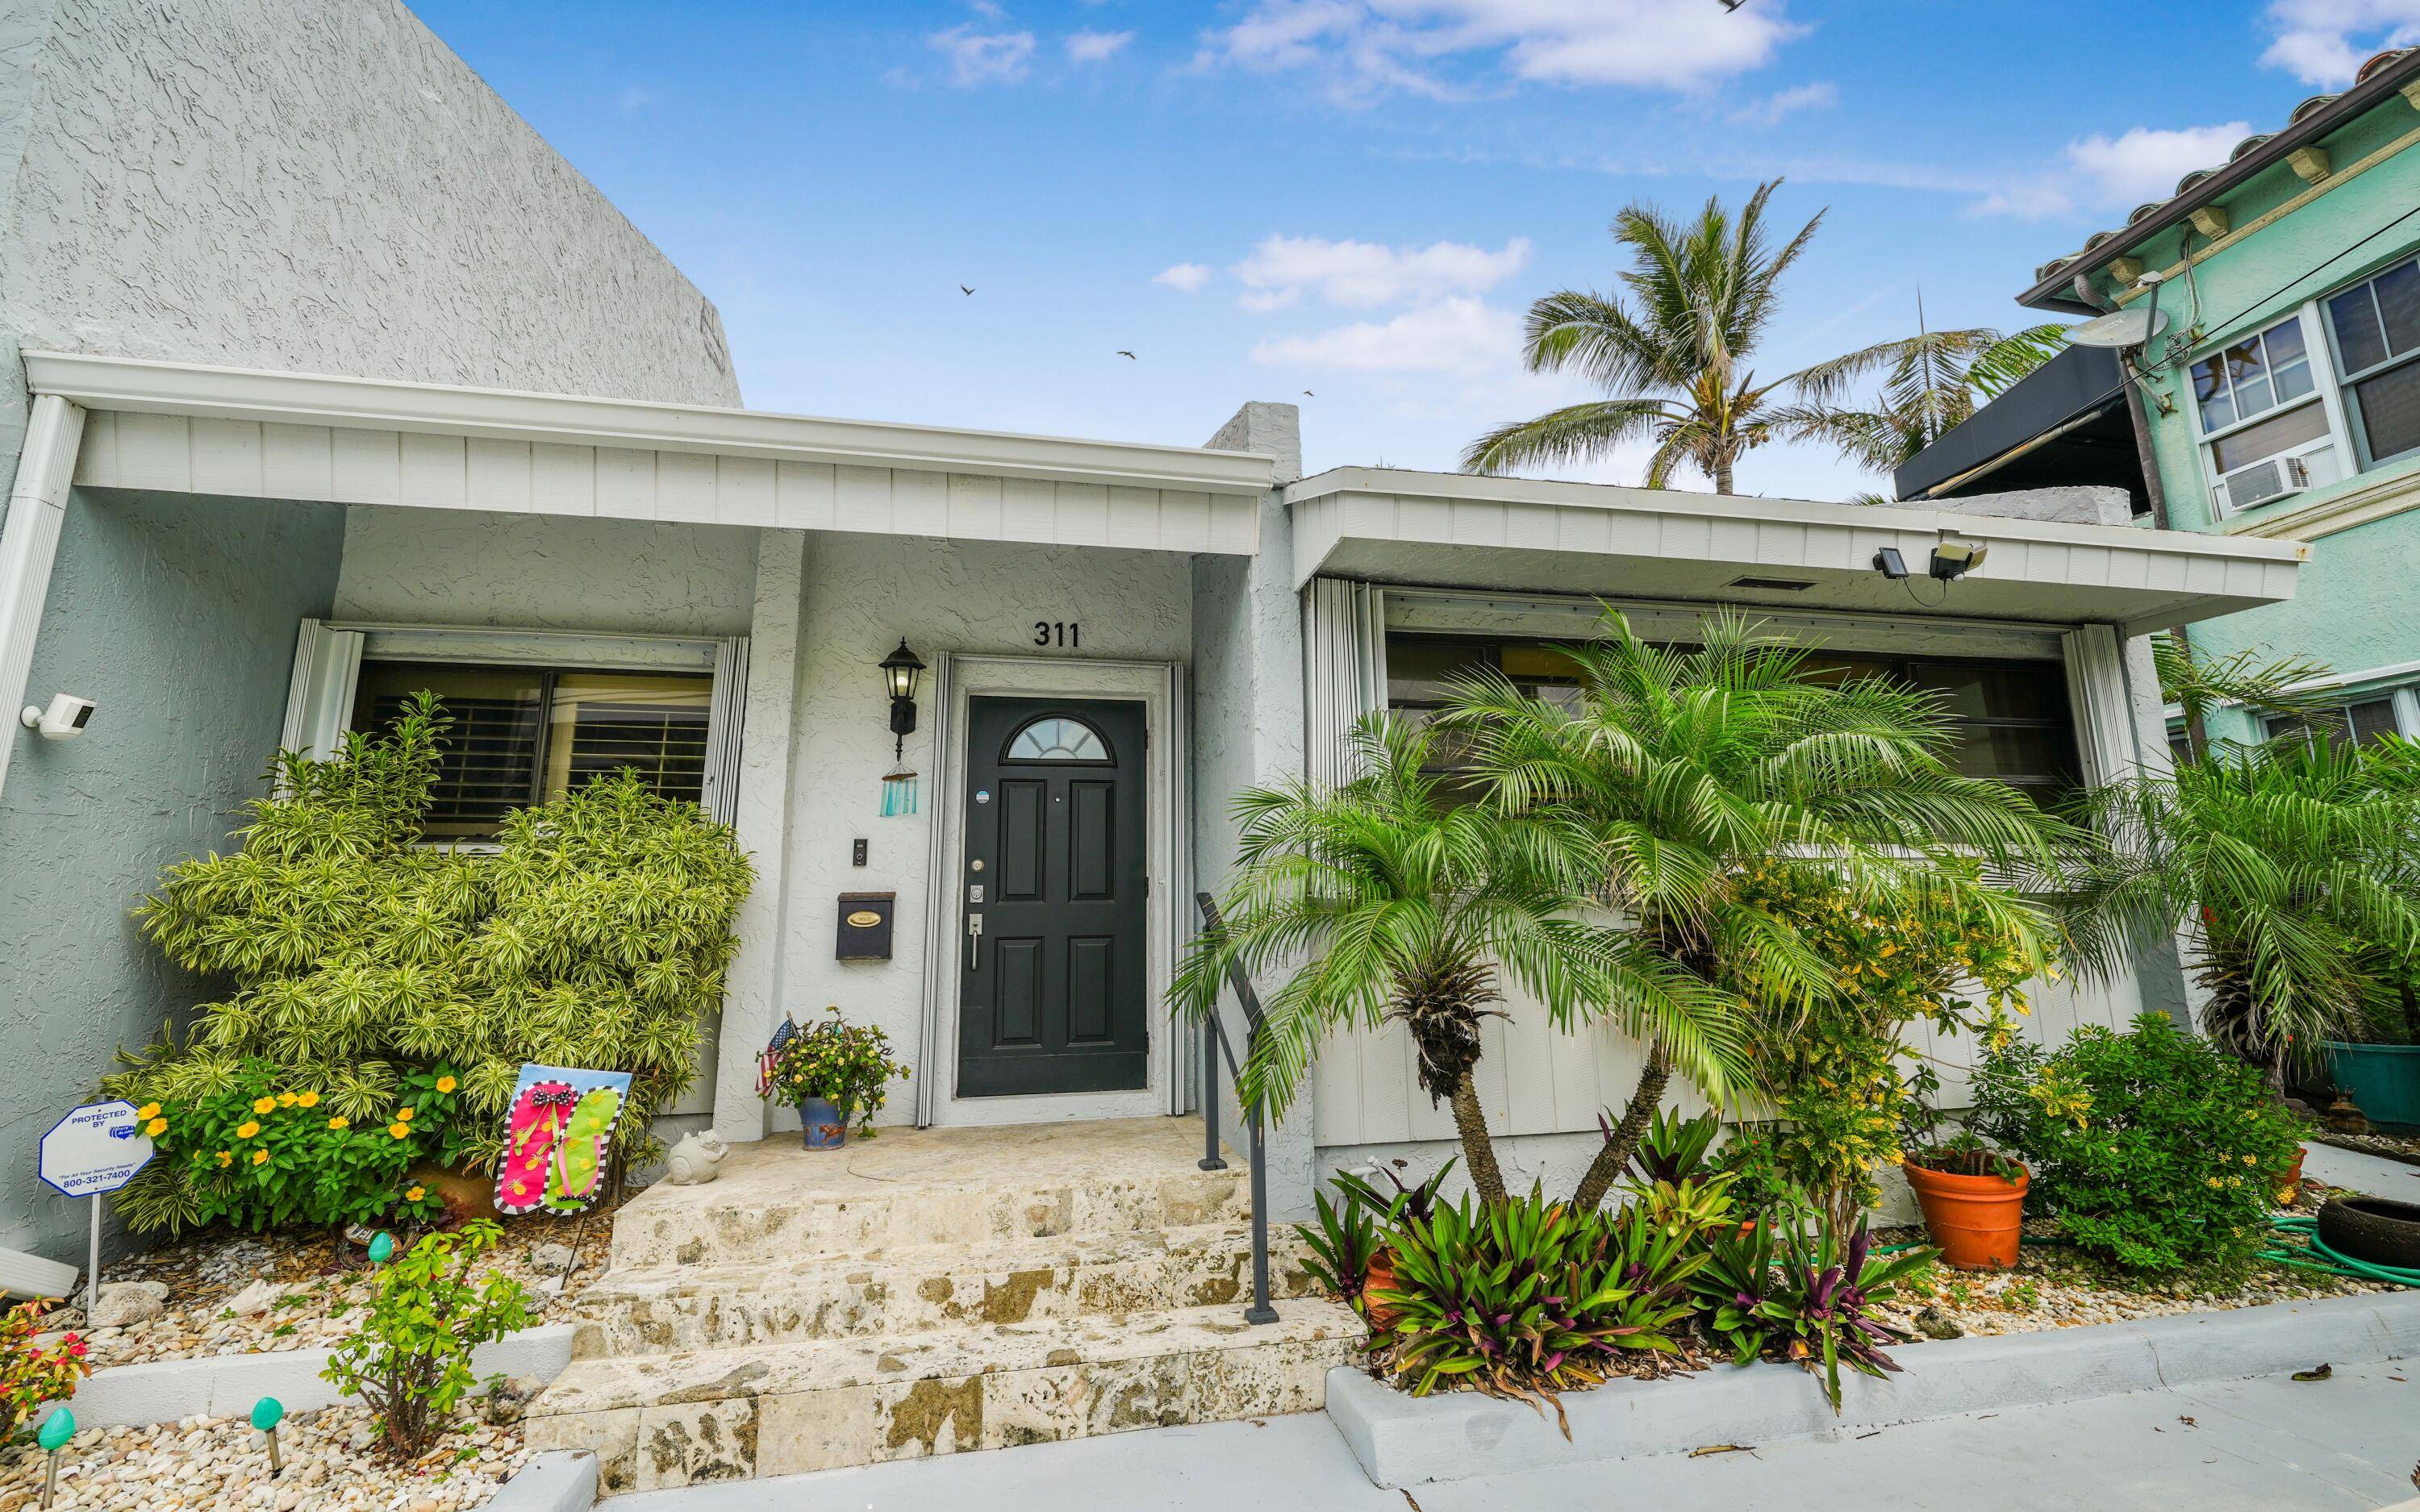 This charming 2 bedroom, 2 bathroom condo offers a cozy beach cottage vibe and is just steps away from the beach, offering easy access to the sand and surf.